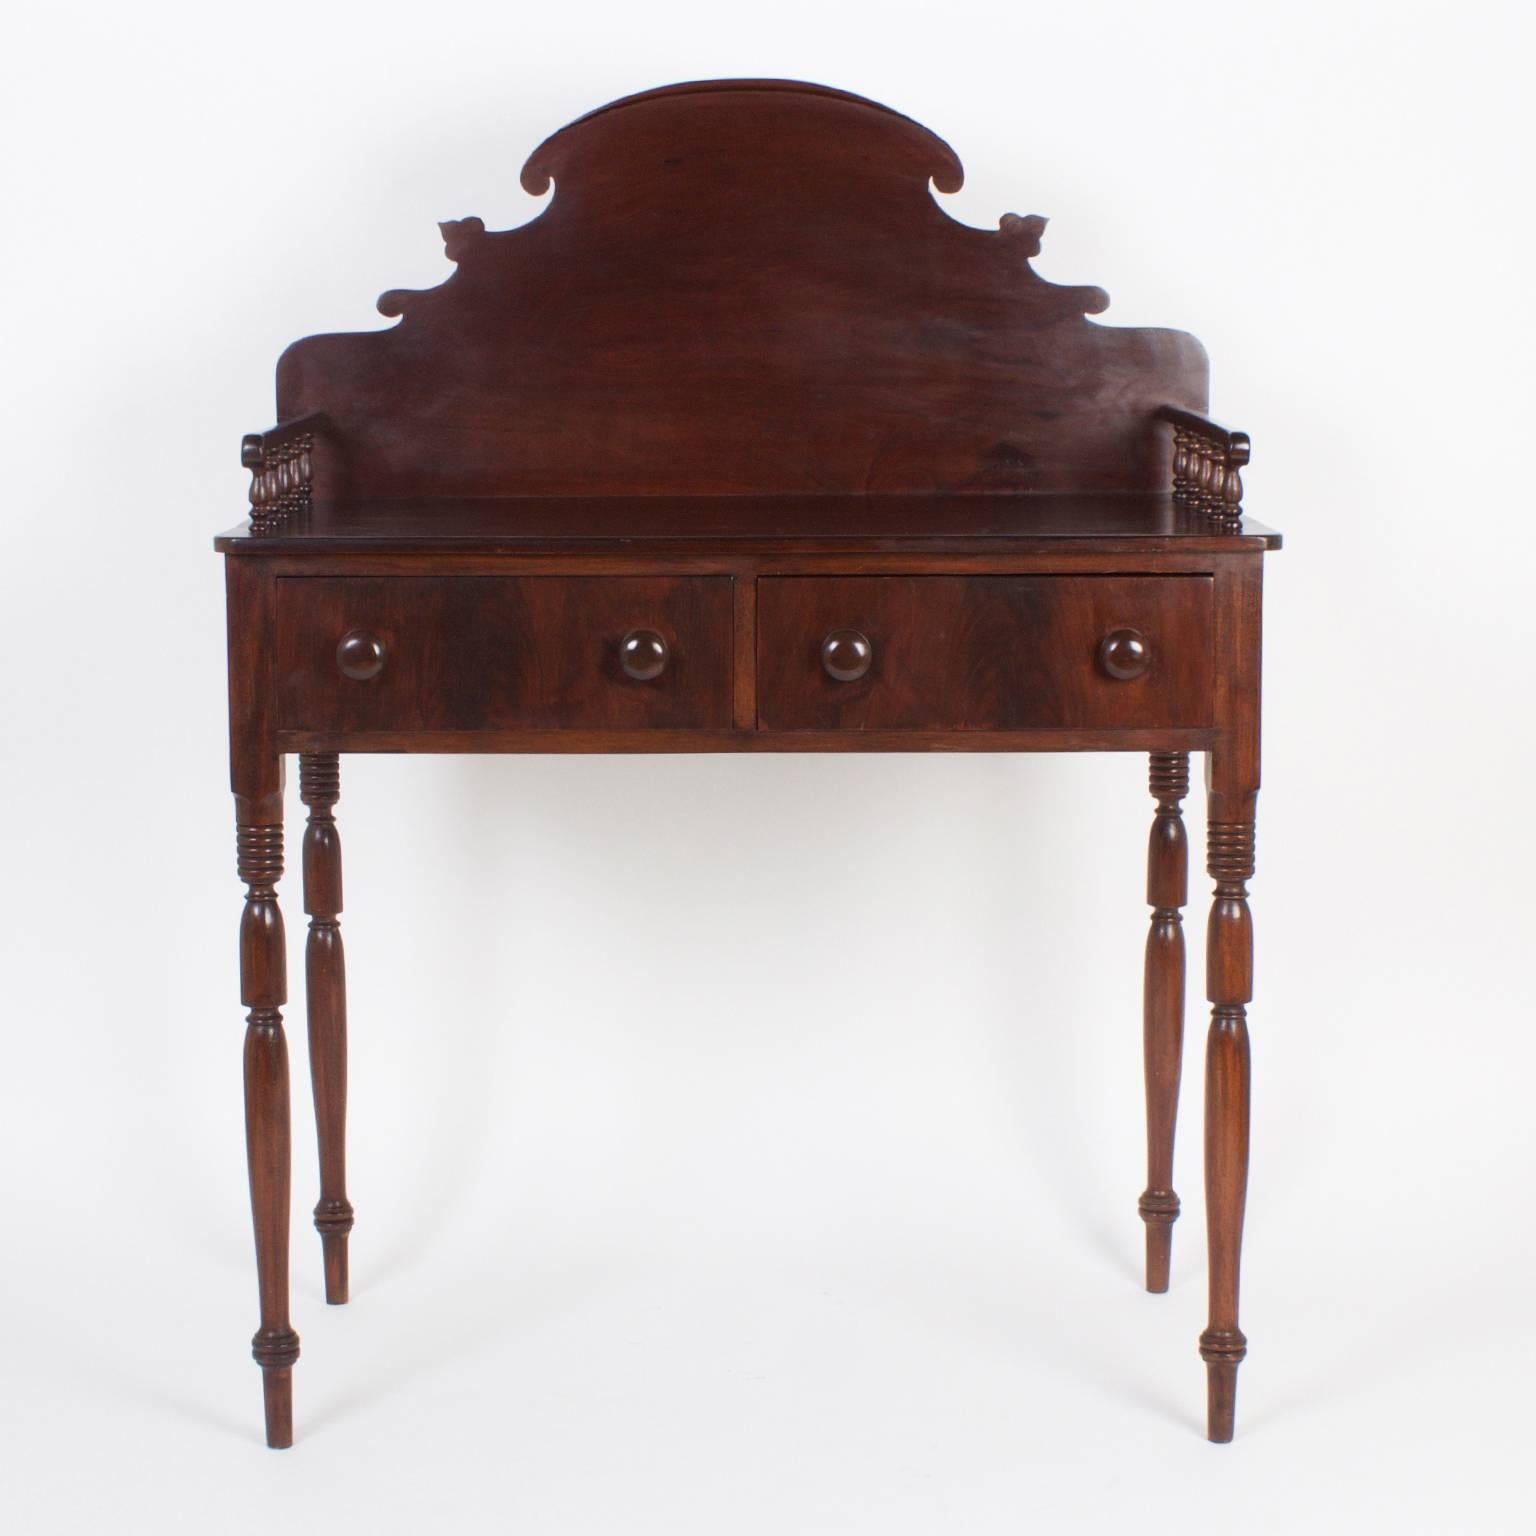 Handsome, antique British colonial server or bar probably from St. Croix in the West Indies. Crafted with mahogany and featuring a dramatic back splash, side galleries with turned supports, two drawers and long elegant turned legs. The form and